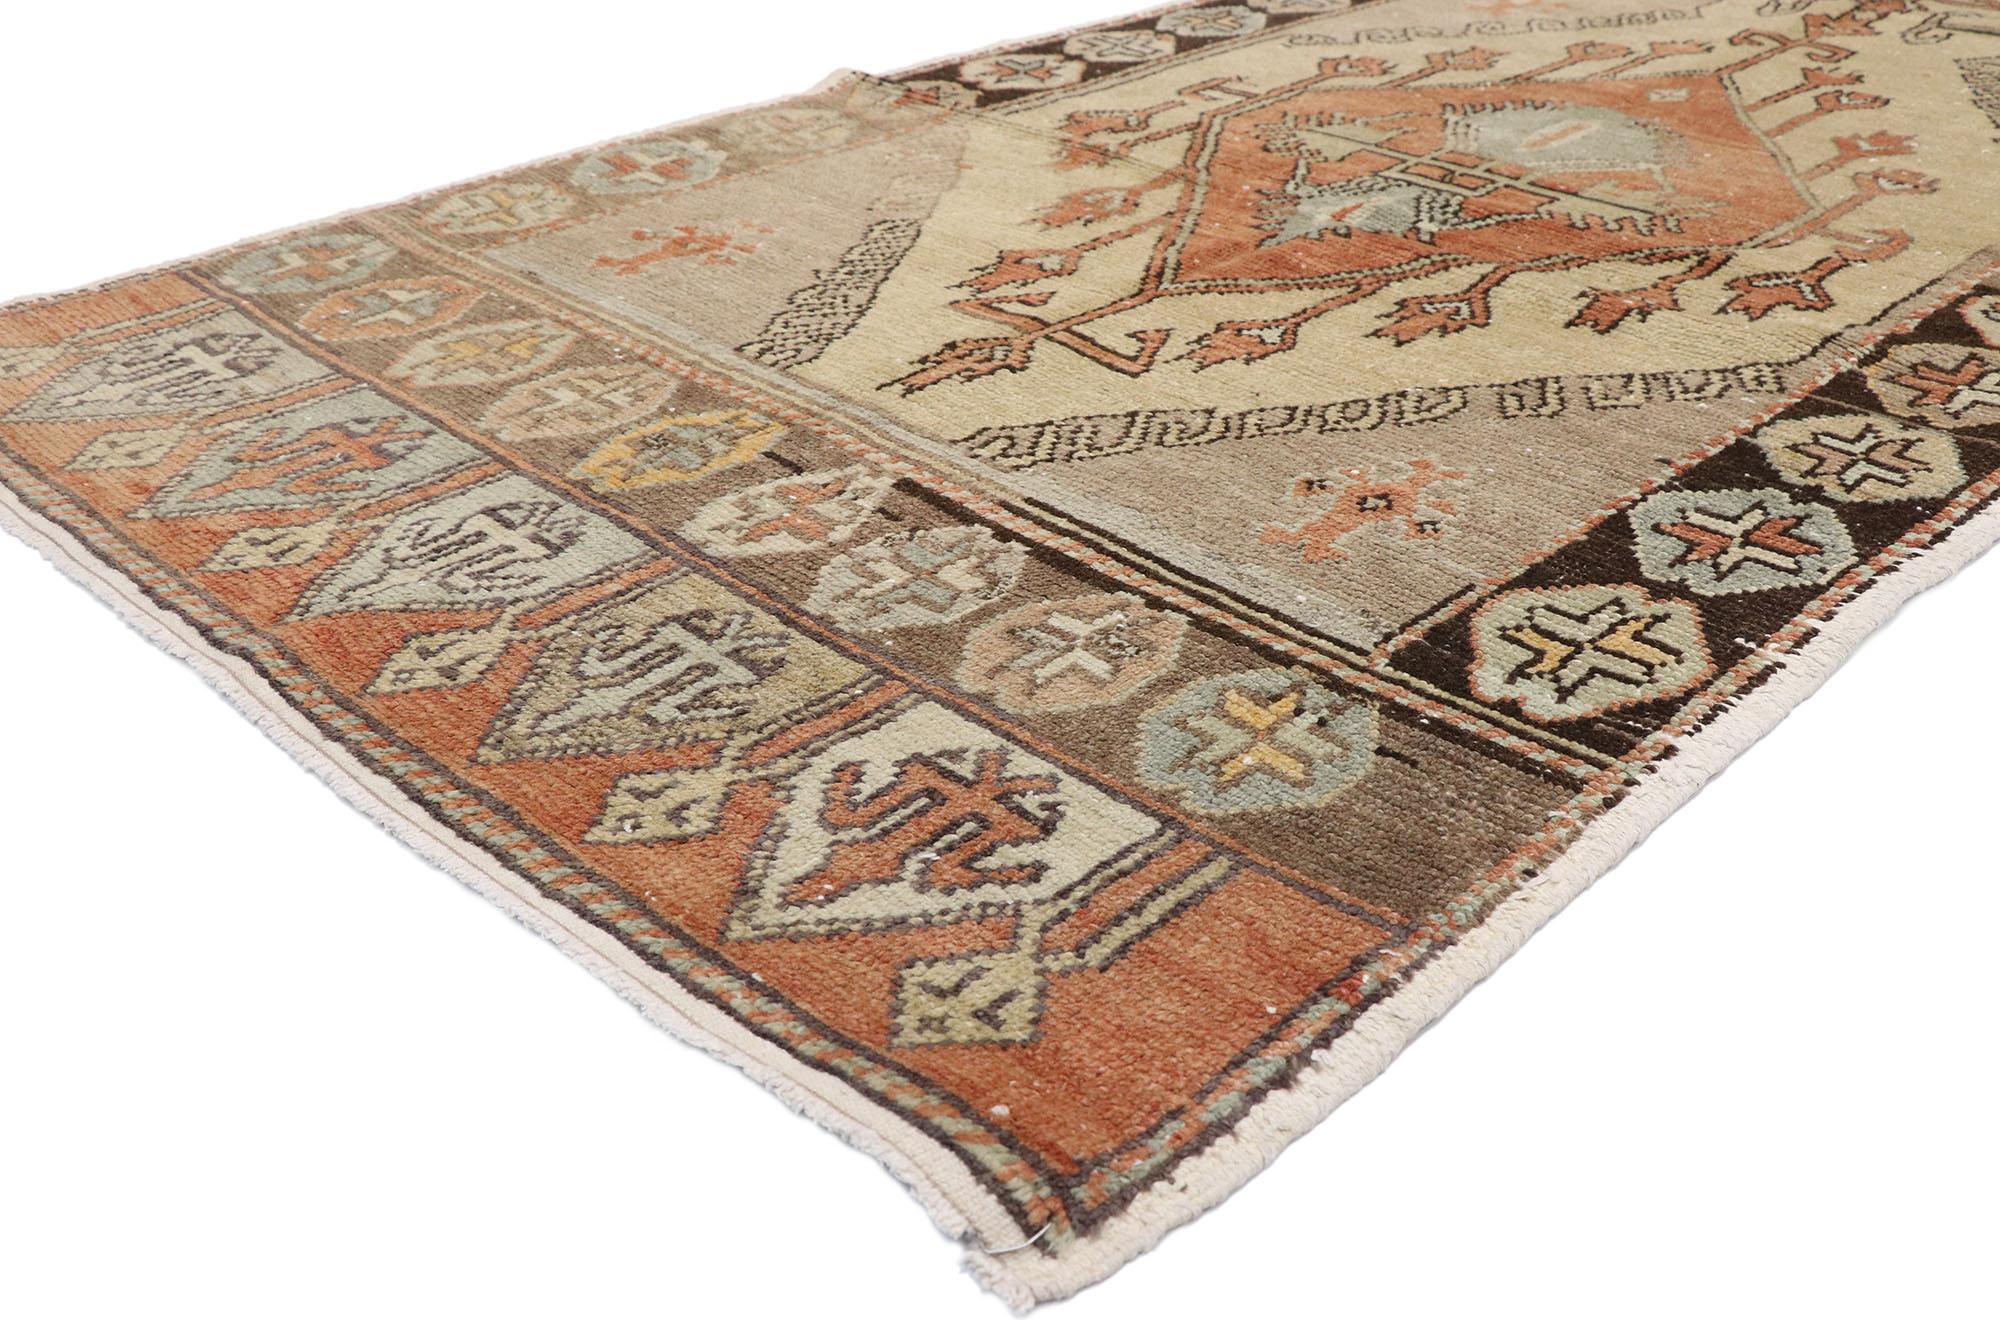 52711 Vintage Turkish Oushak Rug Runner, 03'07 x 11'07. 

Originating from the Oushak region in western Turkey, antique-washed Turkish Oushak rugs undergo a meticulous washing process designed to soften colors and introducing subtle variations that